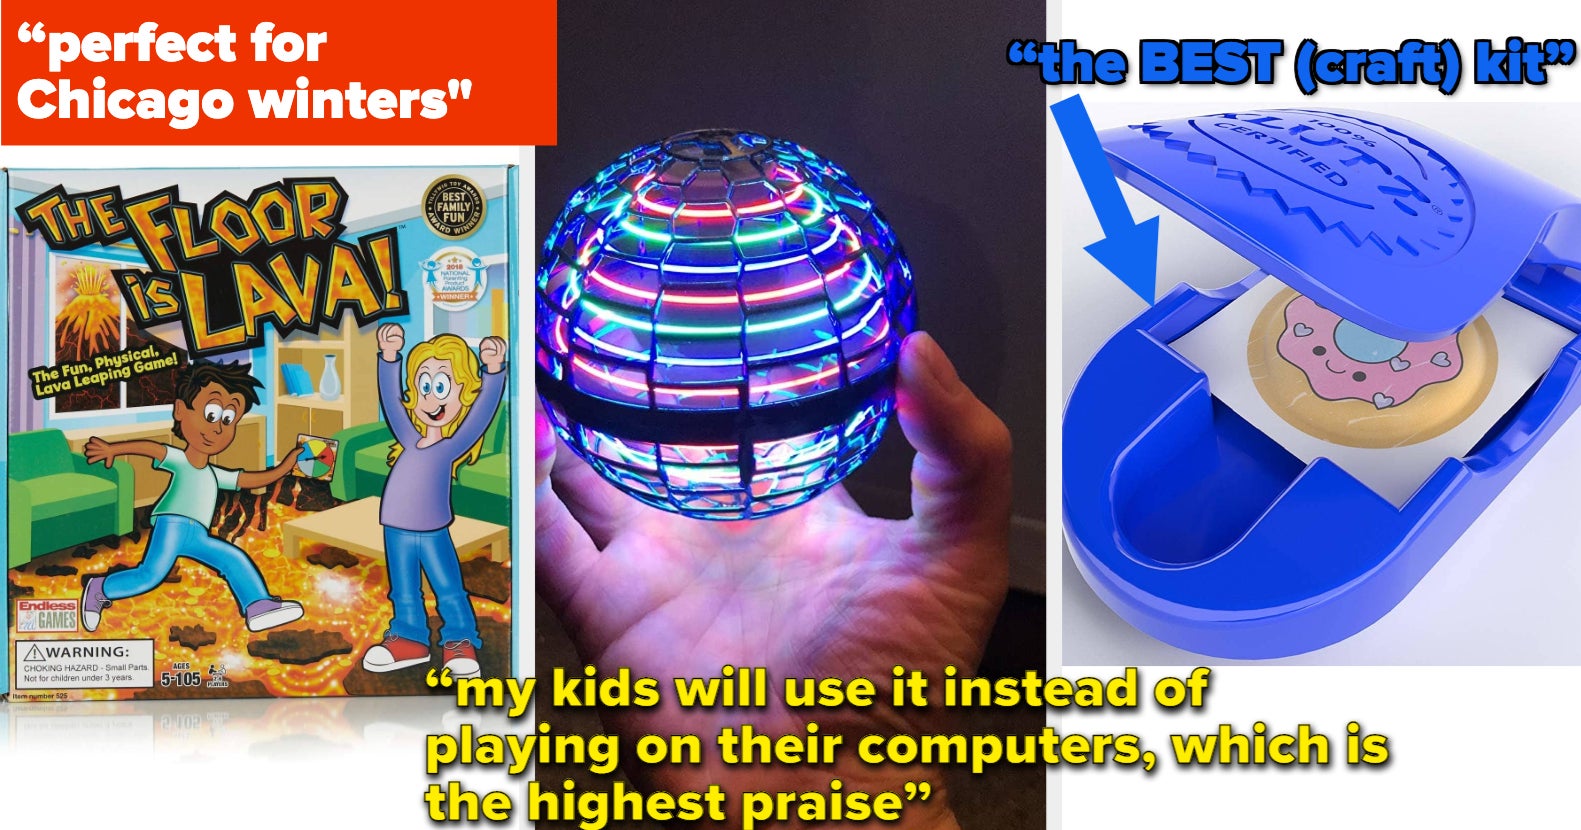 Keep　To　When　33　Stuck　Entertained　Toys　Kids　Indoors